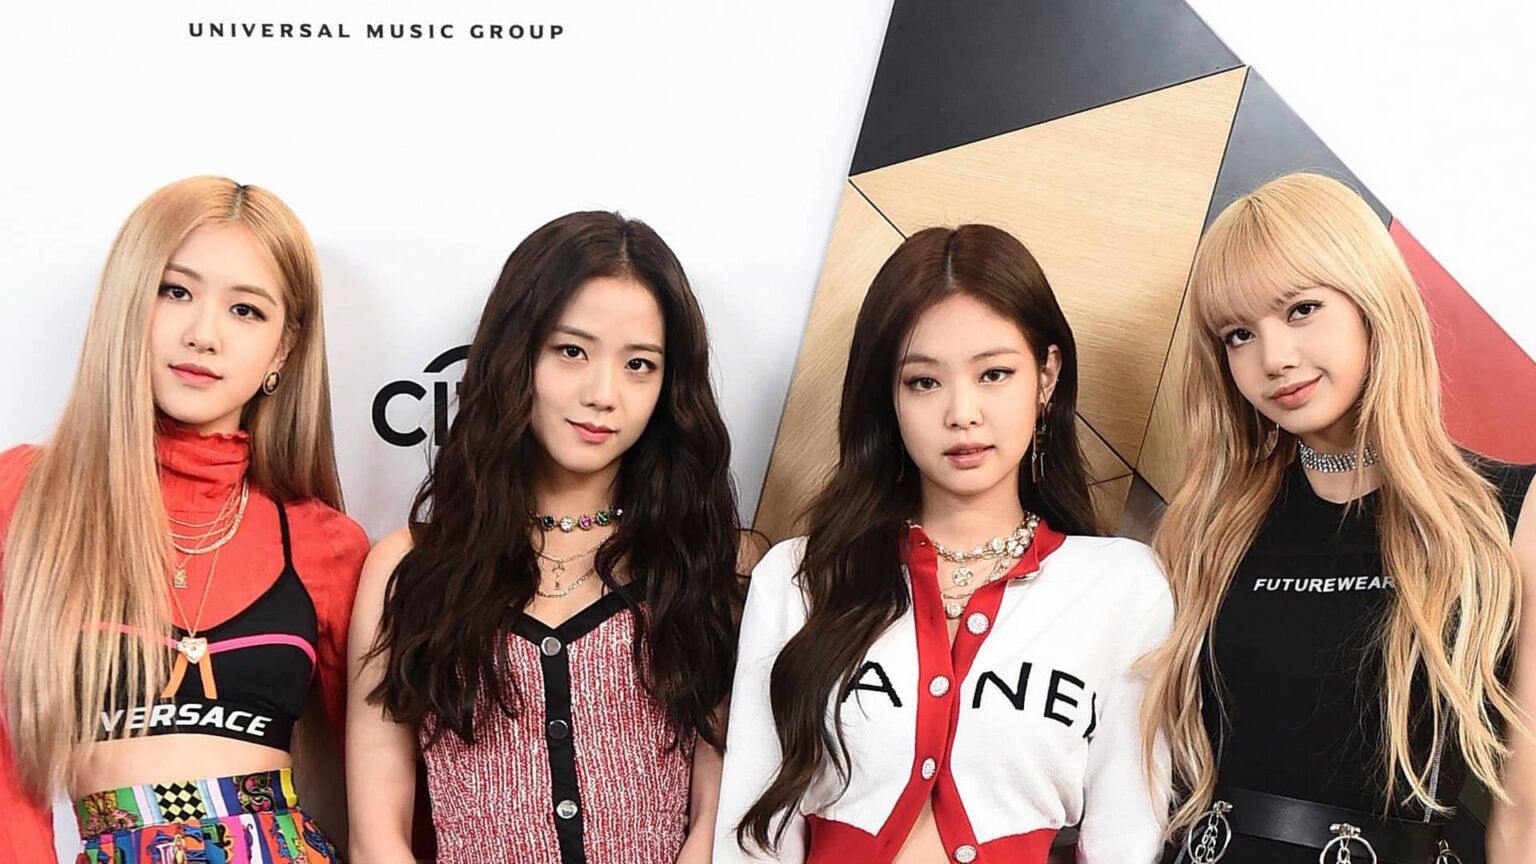 The girls of Blackpink are the queens of K-pop. Here's a look into each fabulous member of the band.